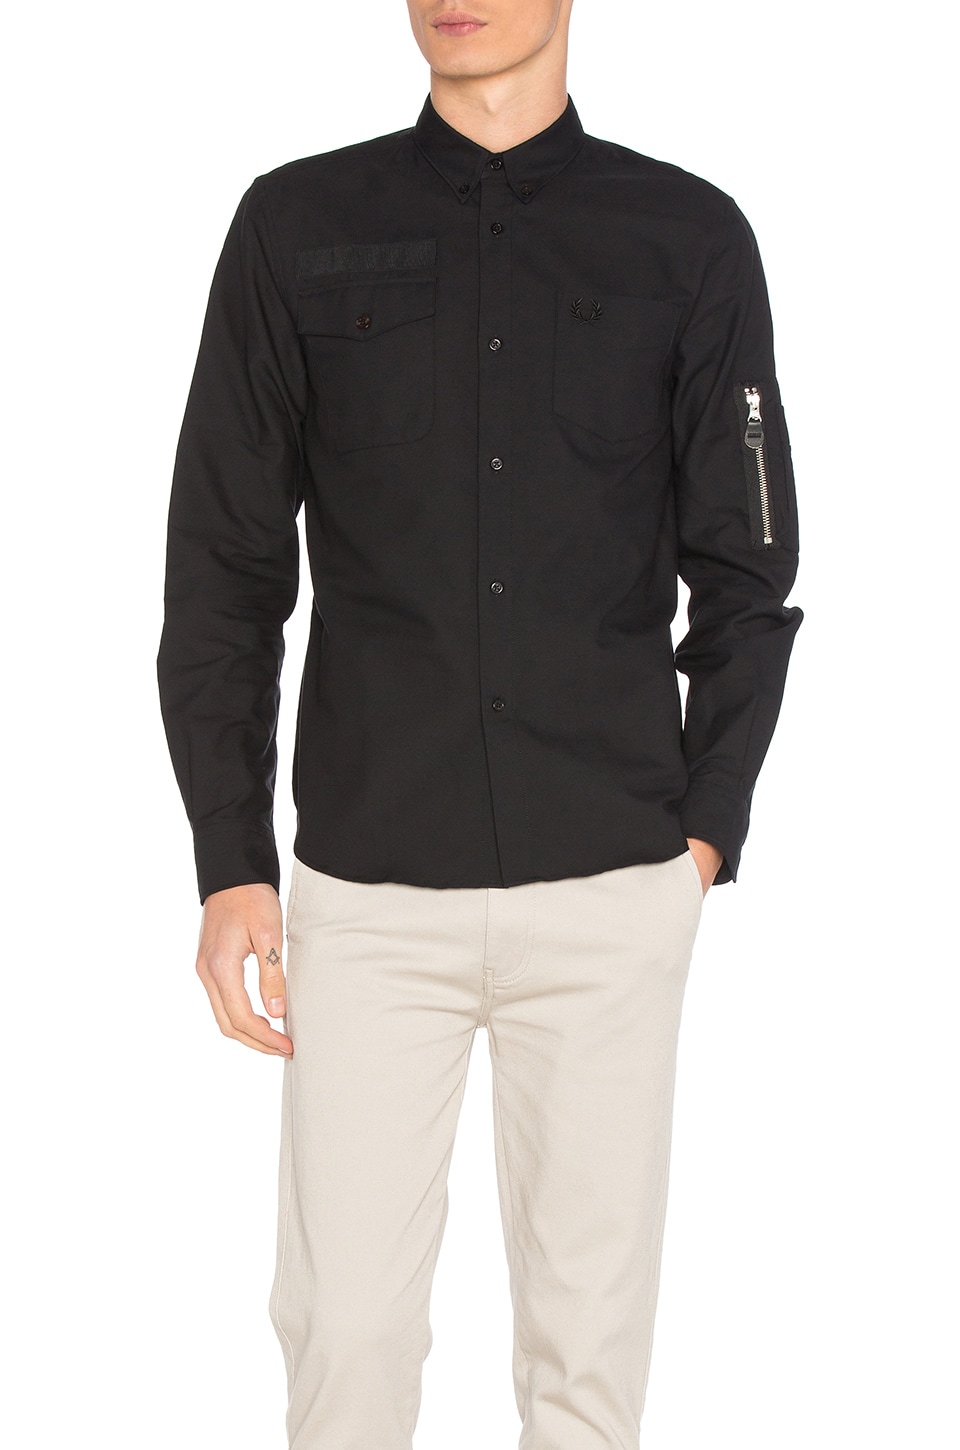 Fred Perry x Art Comes First Pocket Detail Oxford Shirt in Black 